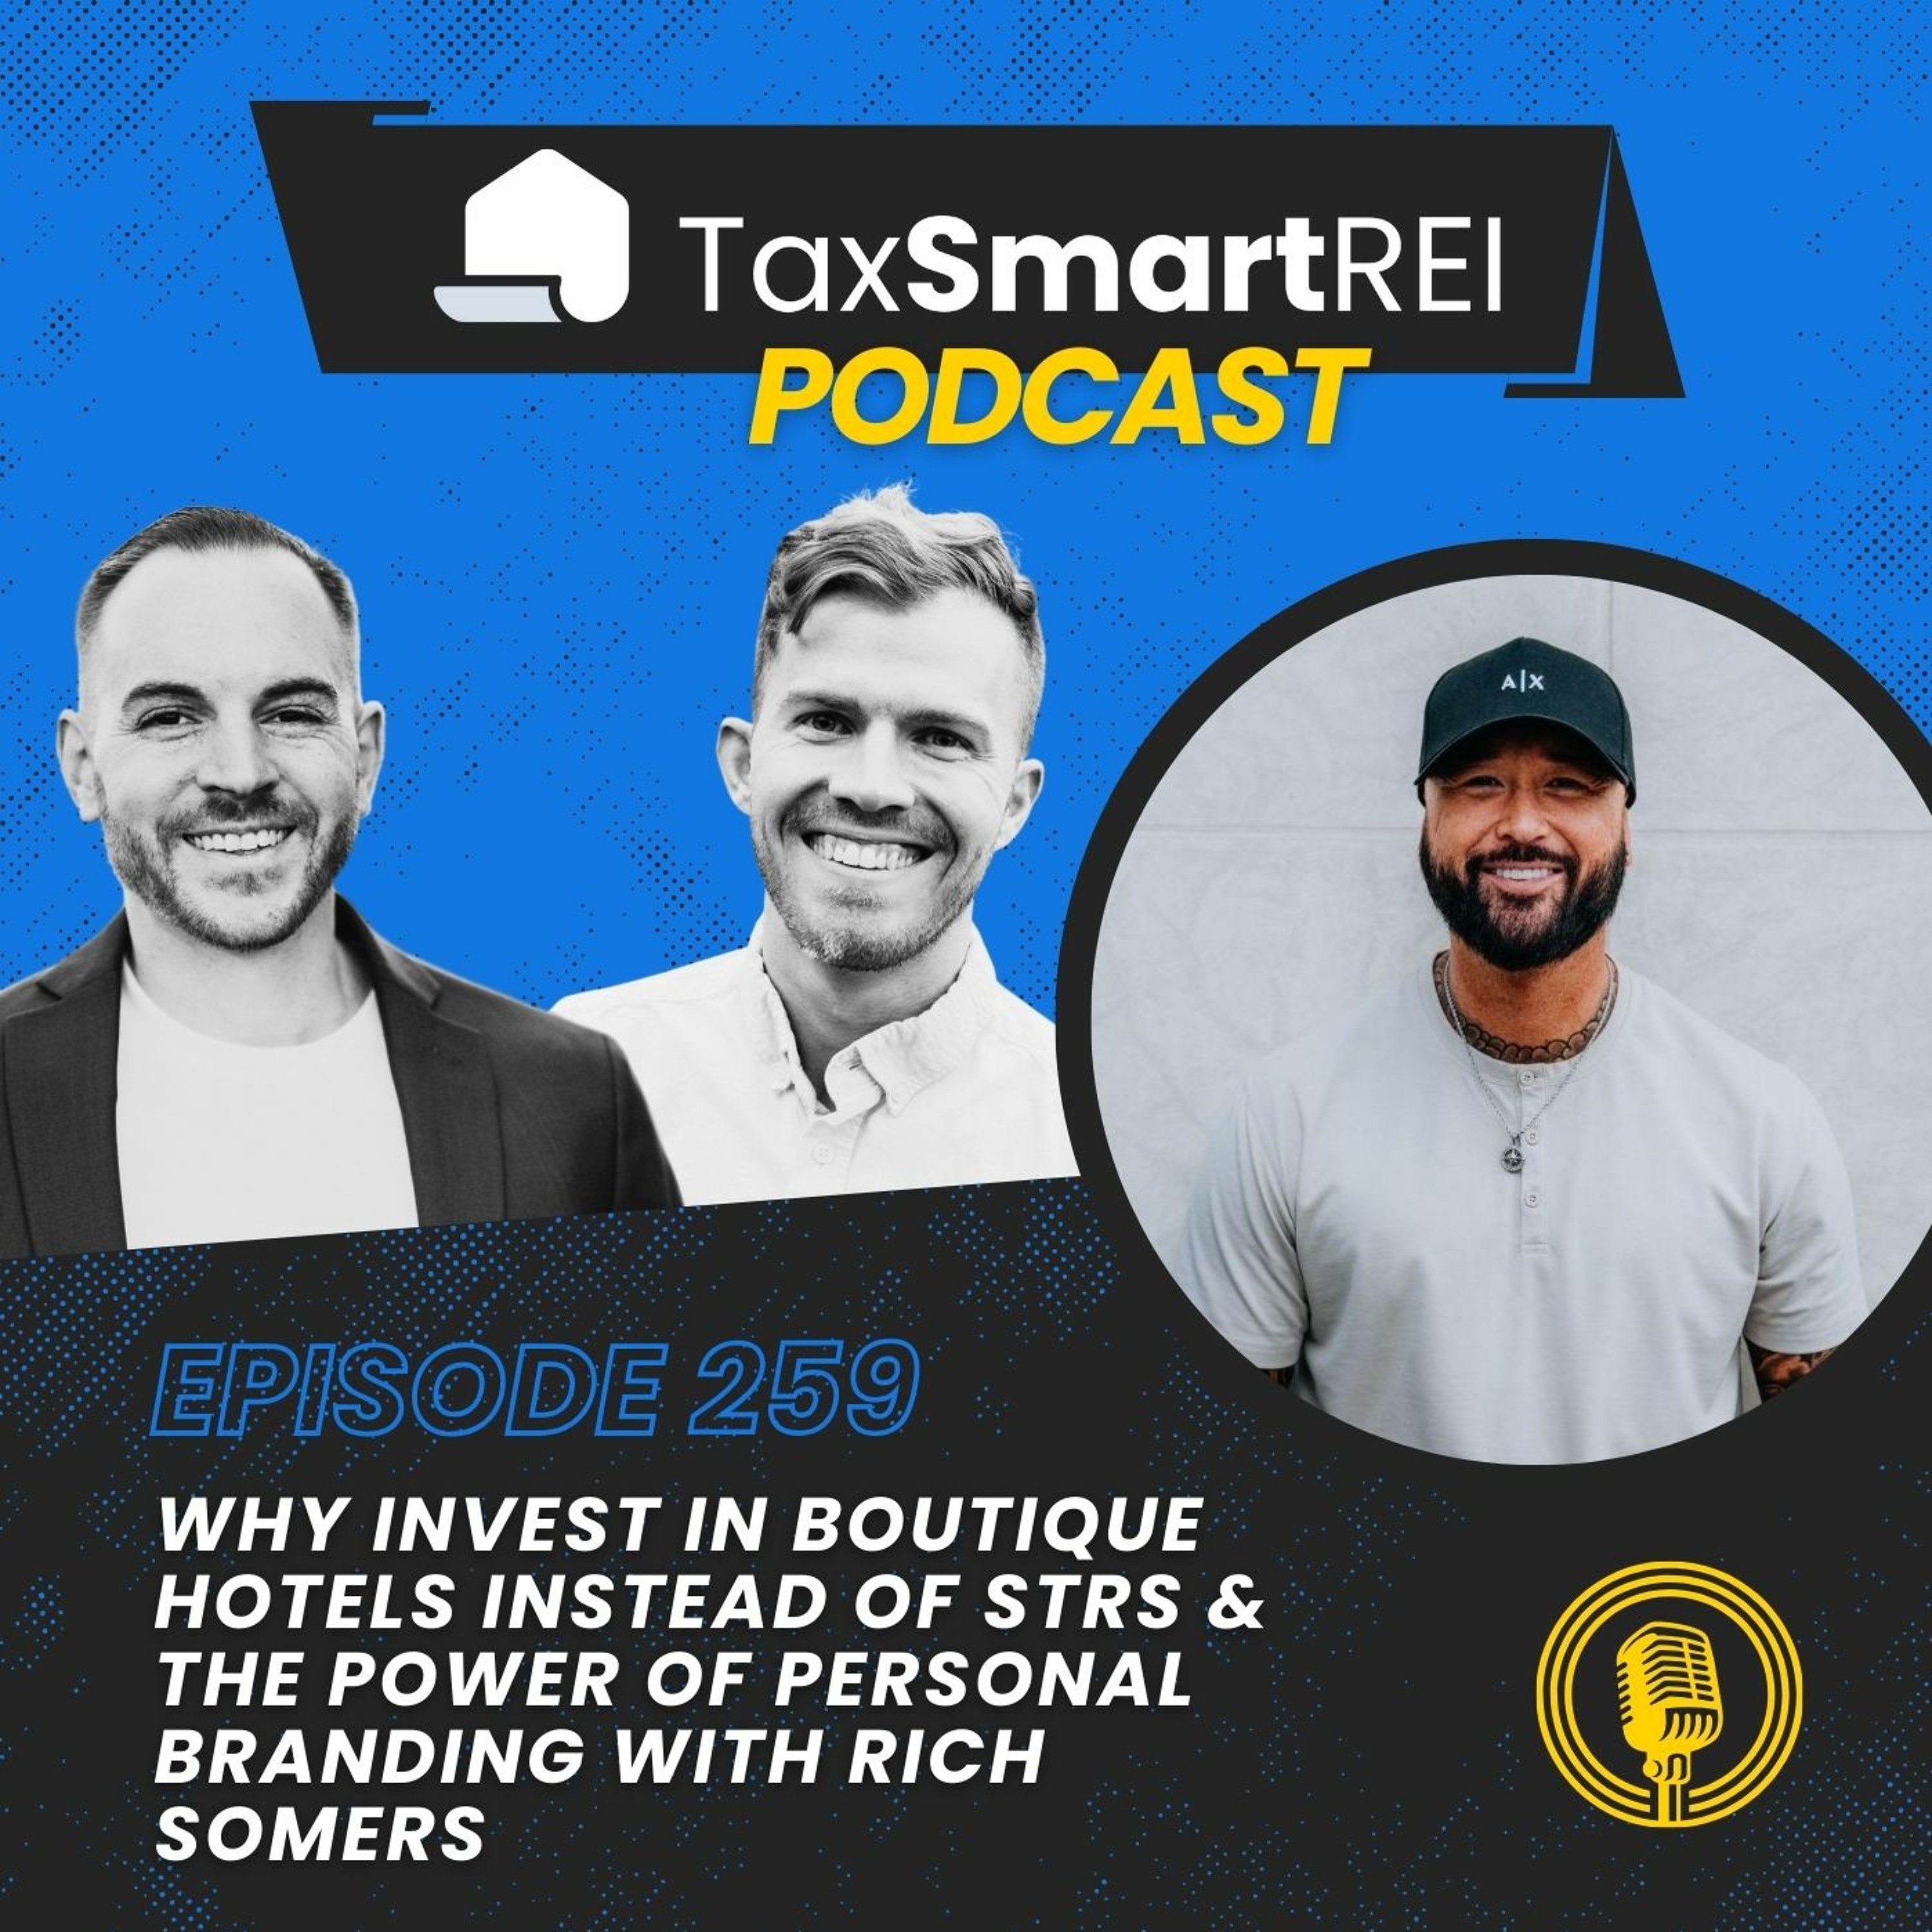 259. Why Invest in Boutique Hotels Instead of STRs & The Power of Personal Branding with Rich Somers